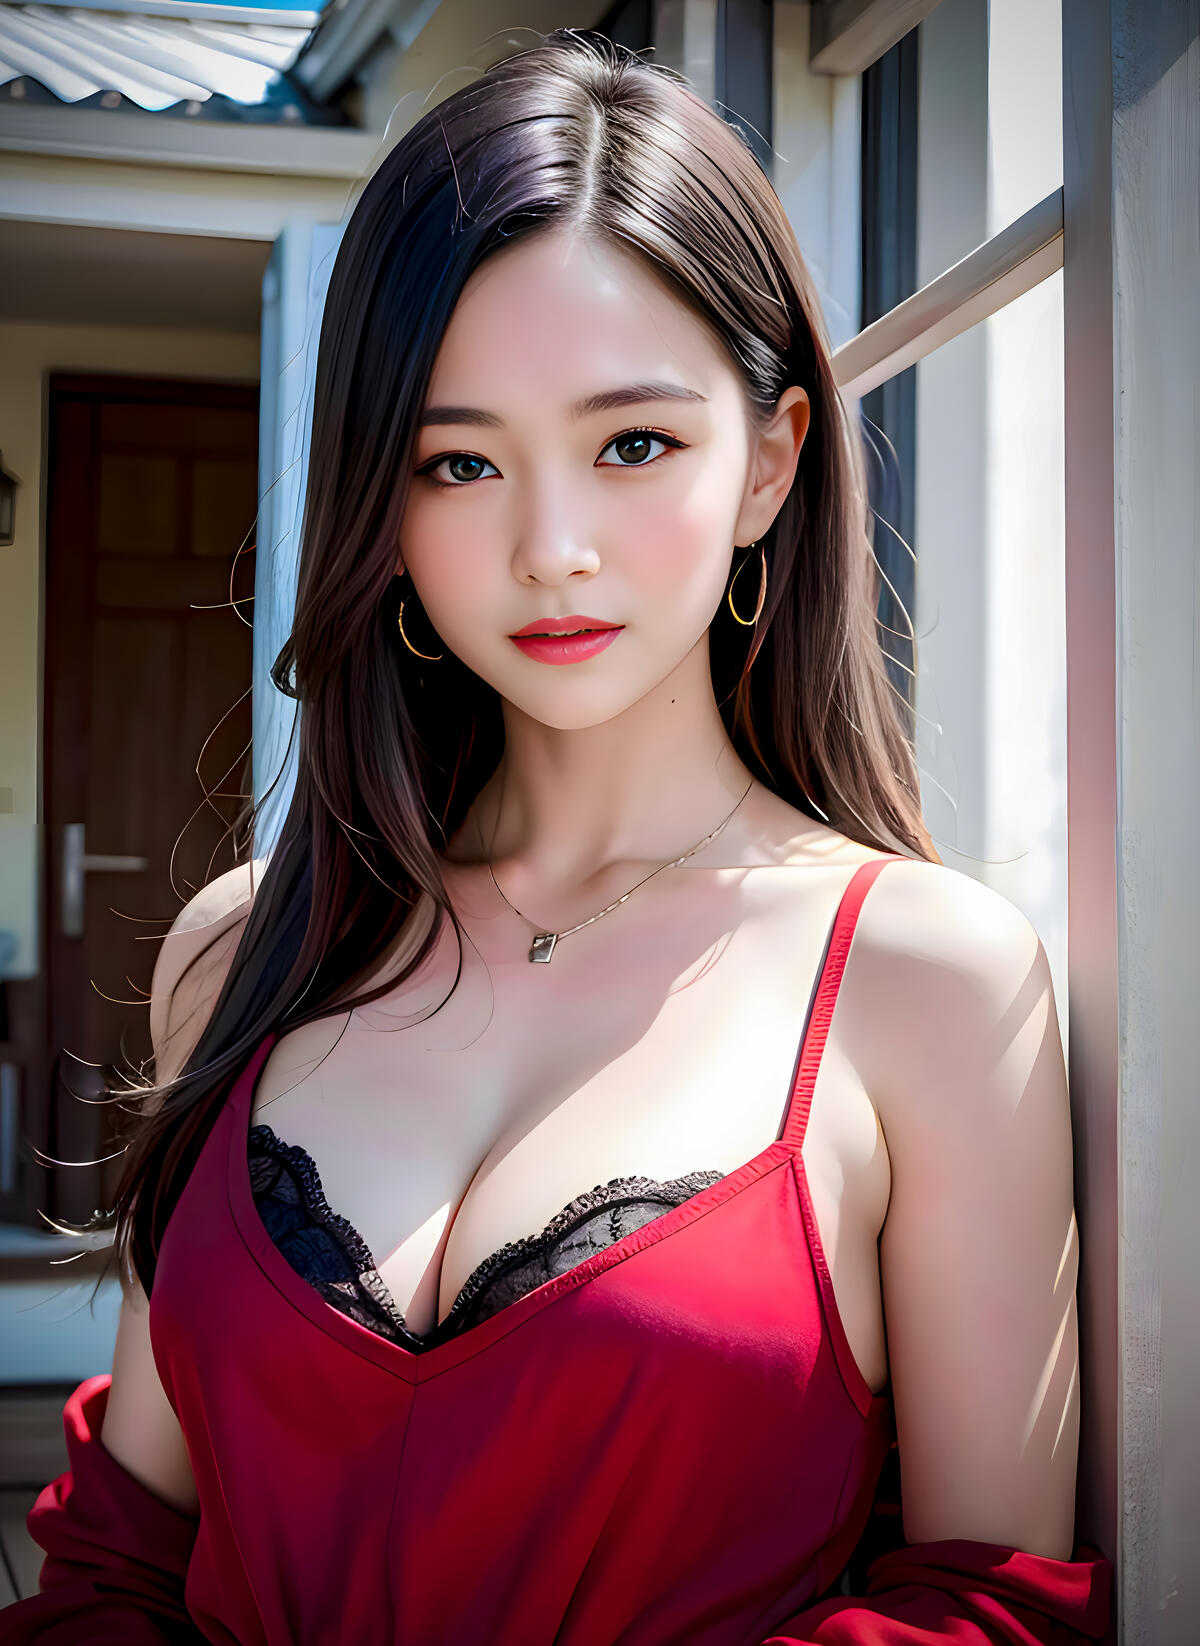 Asian girl in a red dress and black bra